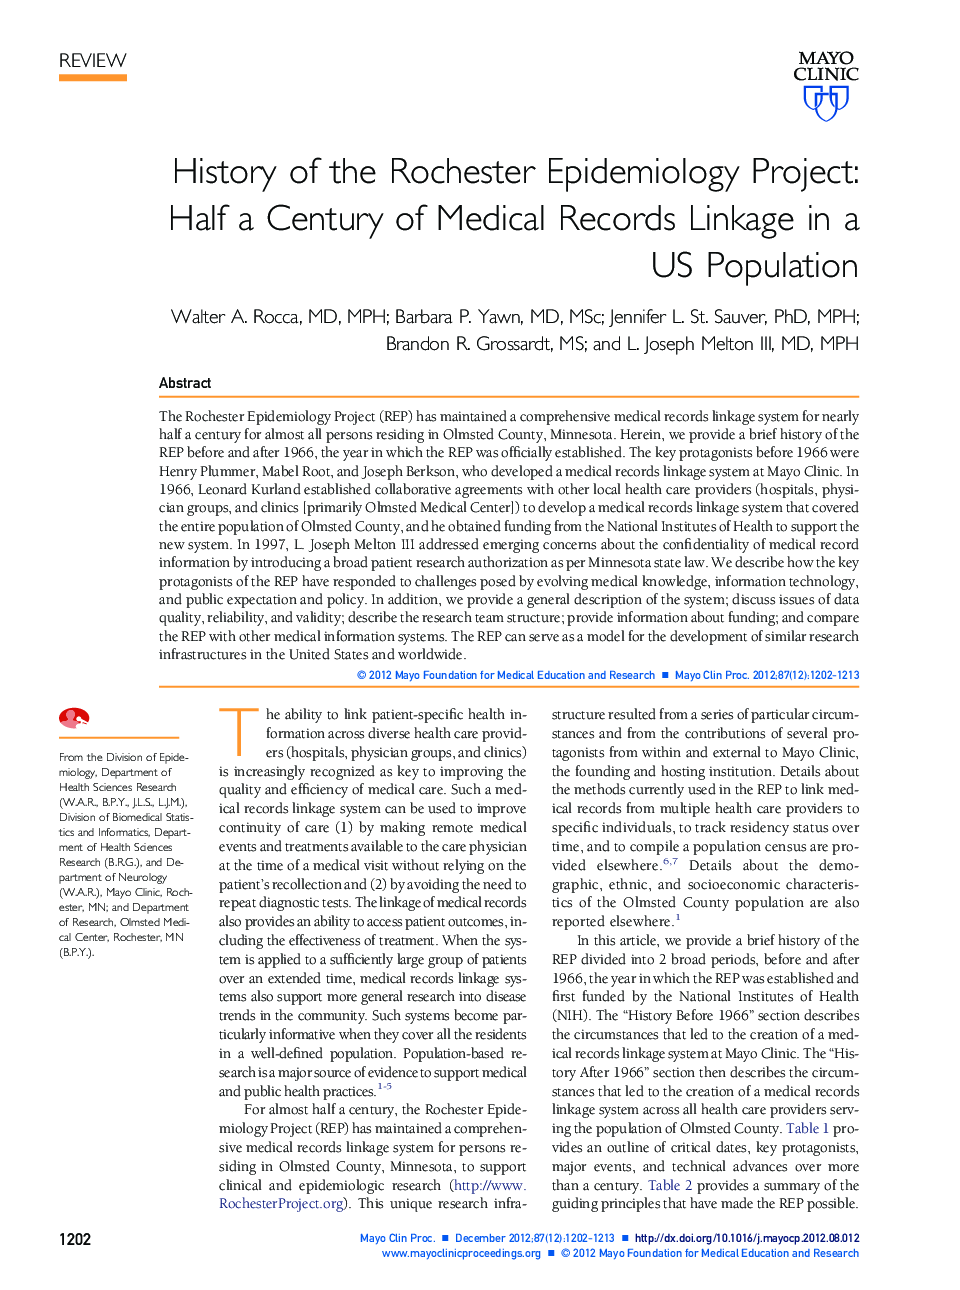 History of the Rochester Epidemiology Project: Half a Century of Medical Records Linkage in a US Population